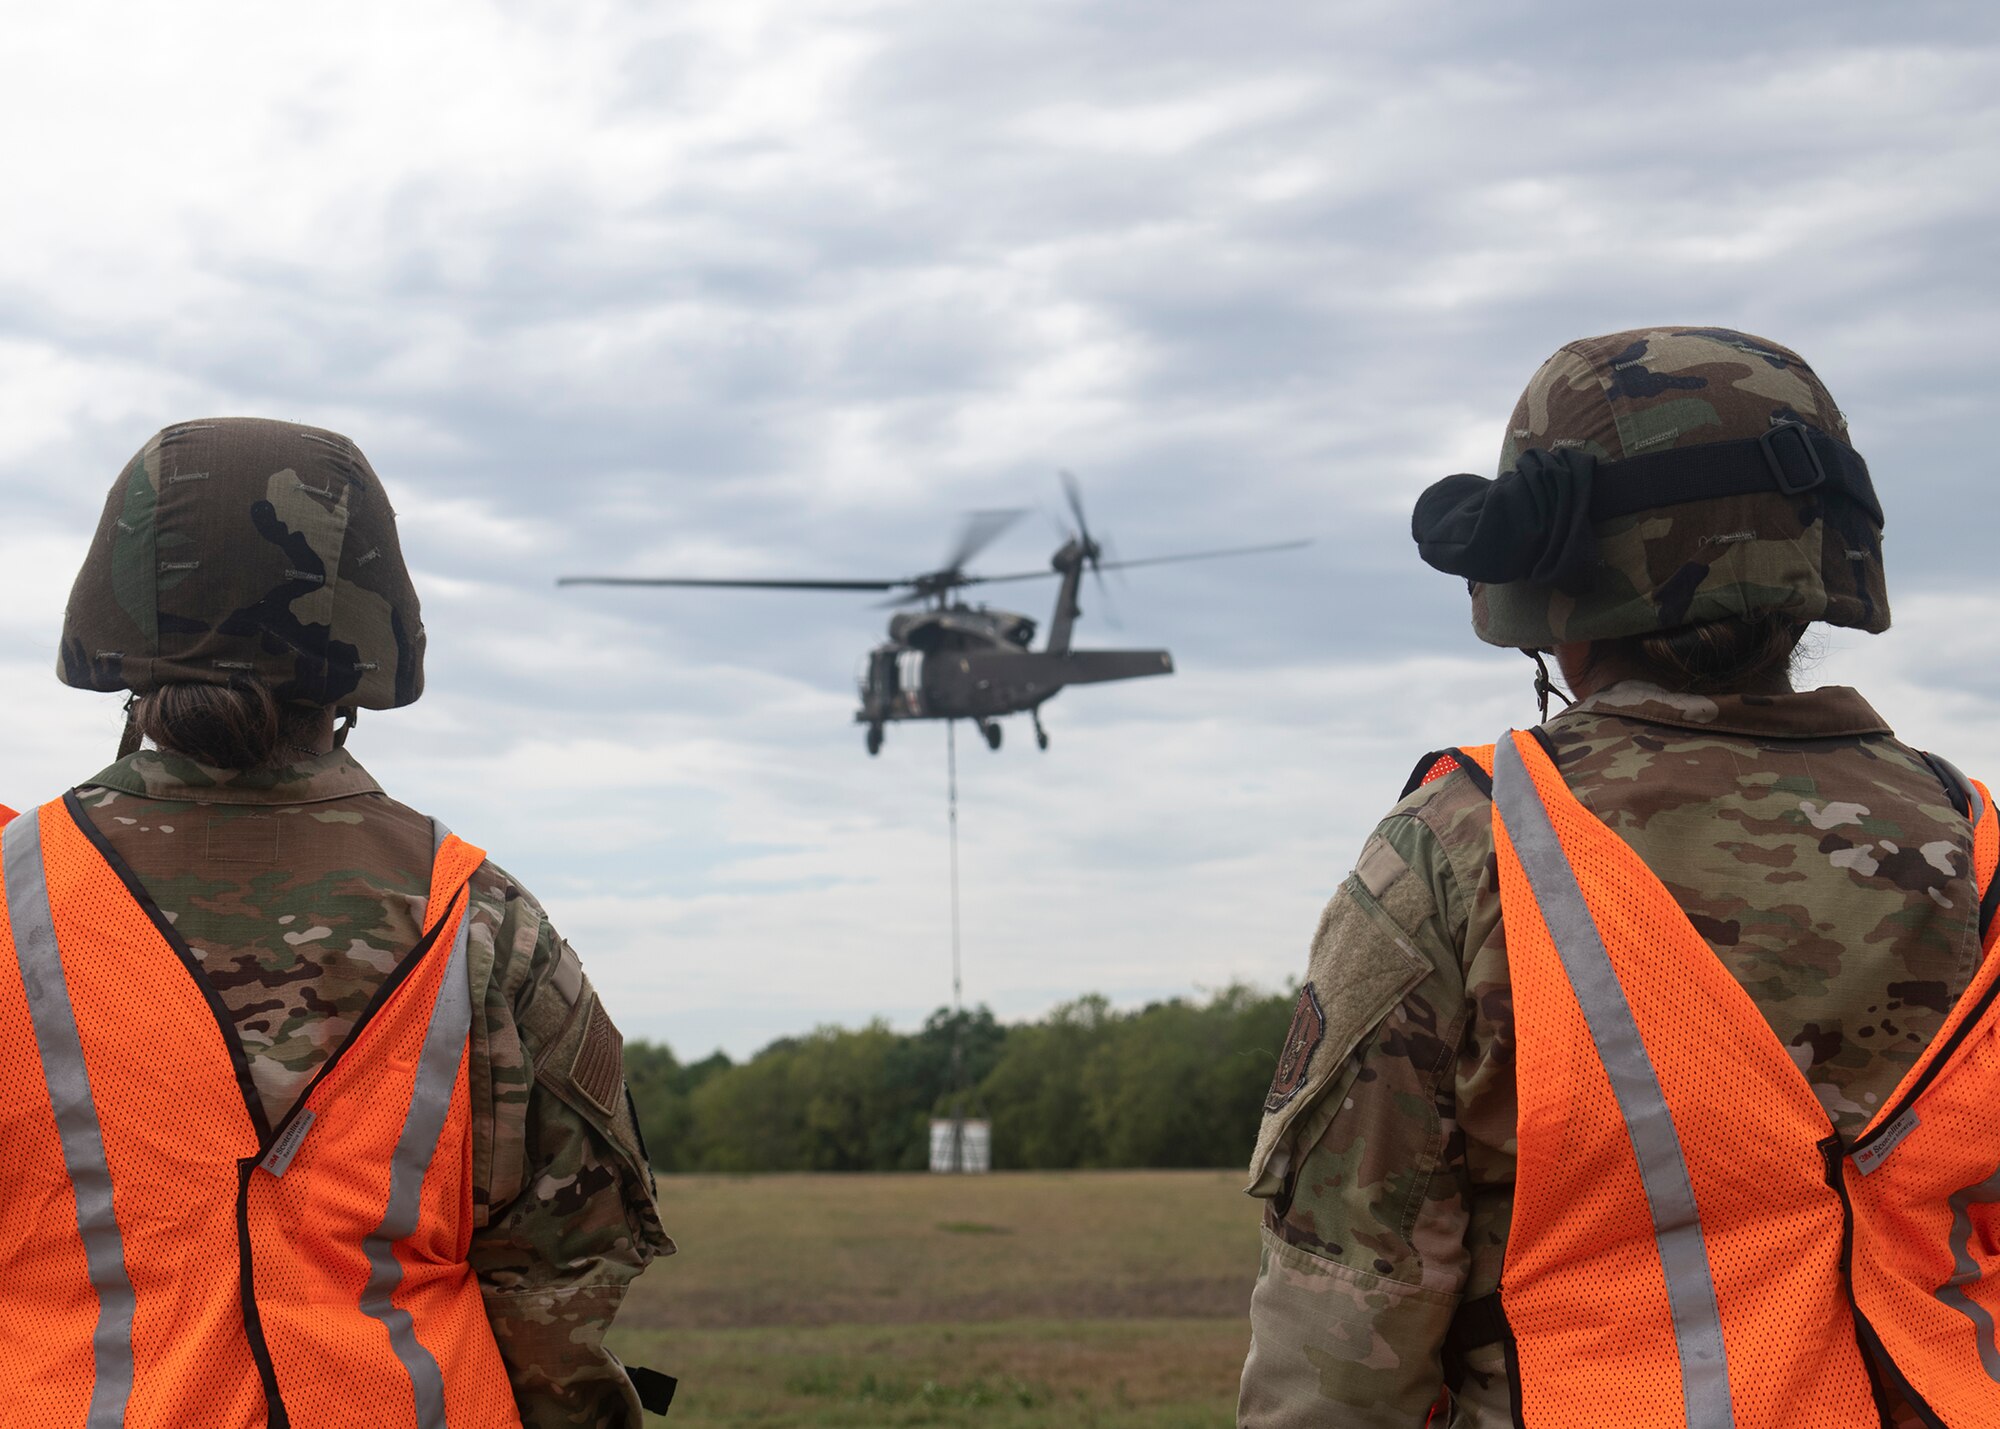 Two Soldiers watching a helicopter lift equipment.